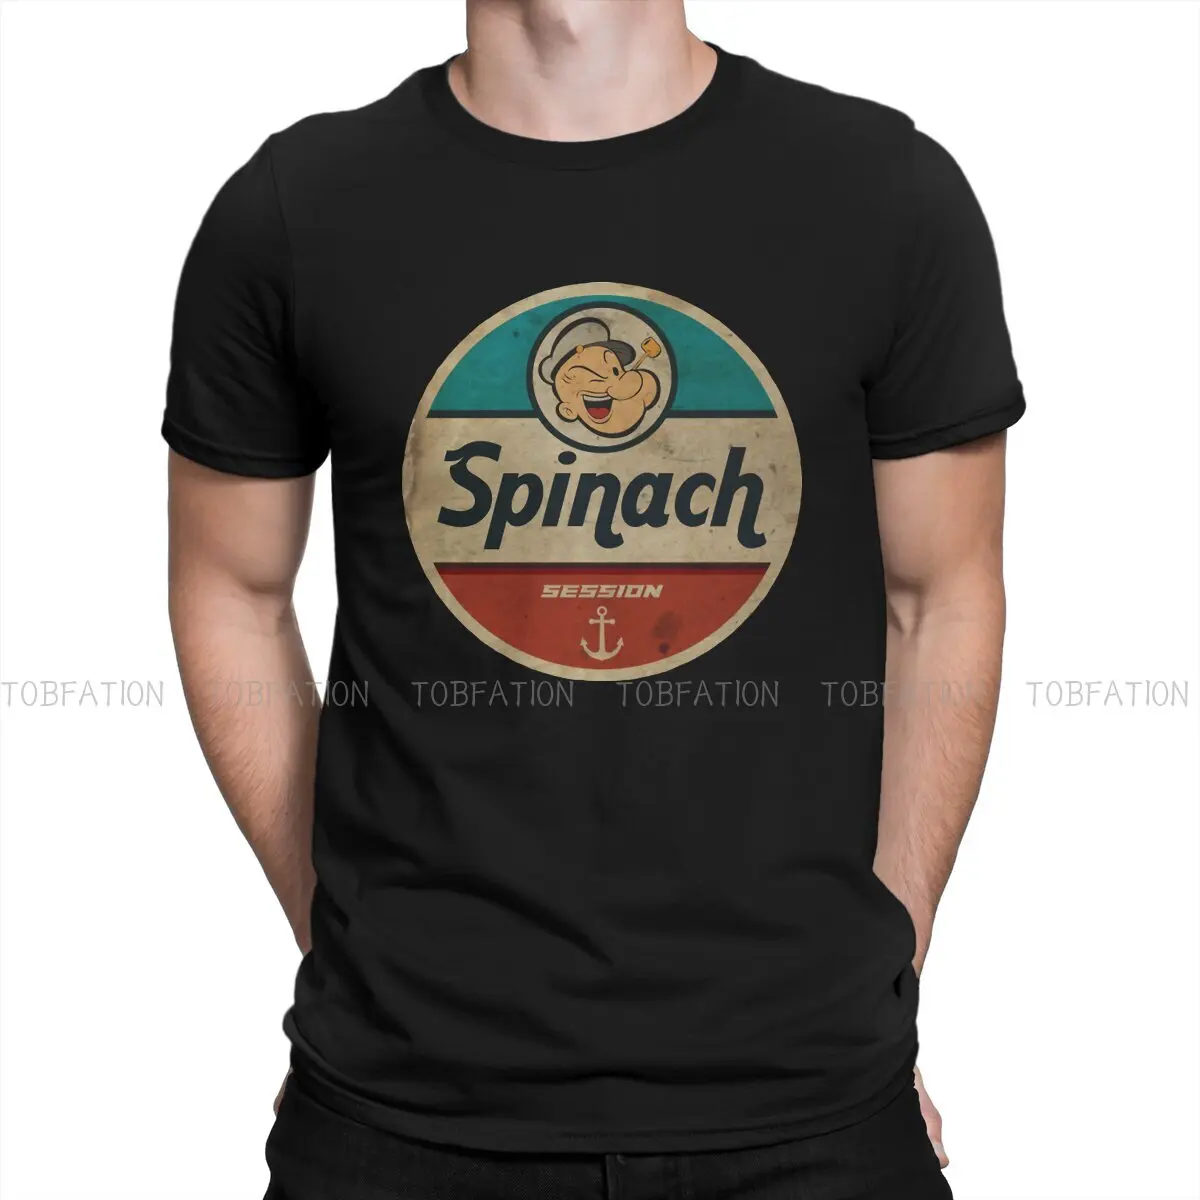 

Spinach Session Round Collar TShirt Popeye The Sailor Hot Blood Animation Pure Cotton Classic T Shirt Men Tops Individuality